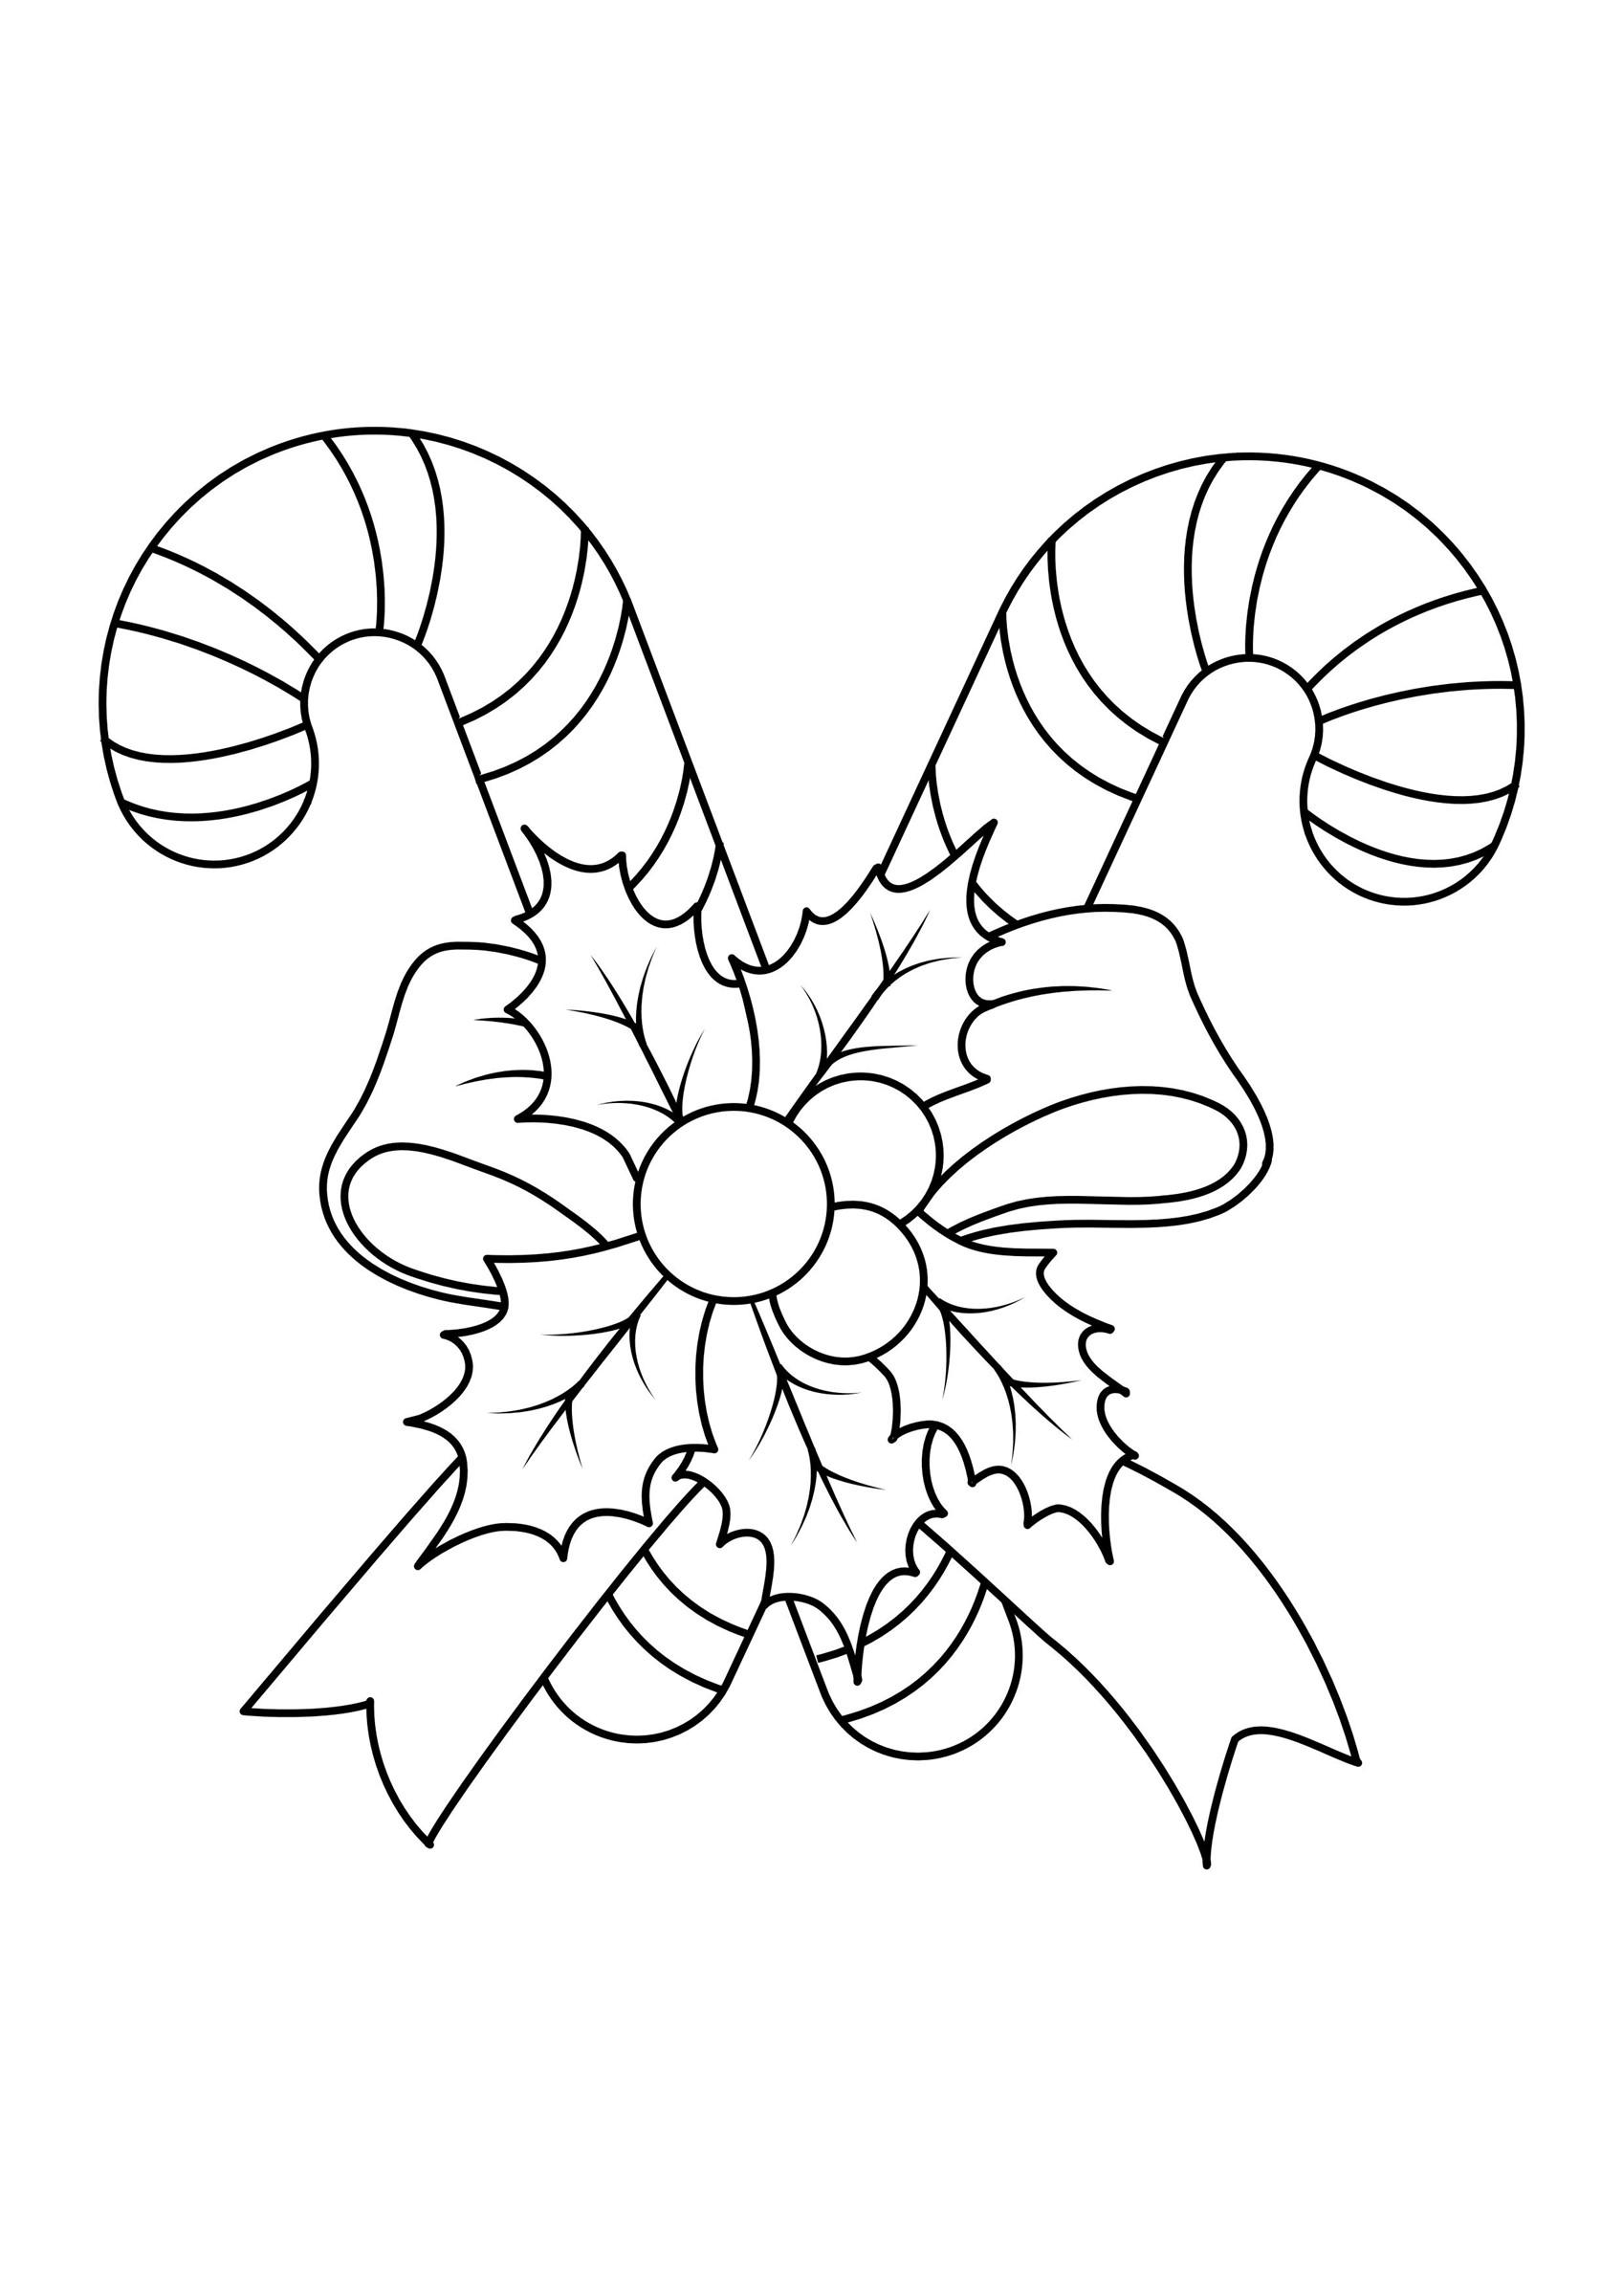 Coloring page Christmas decorations